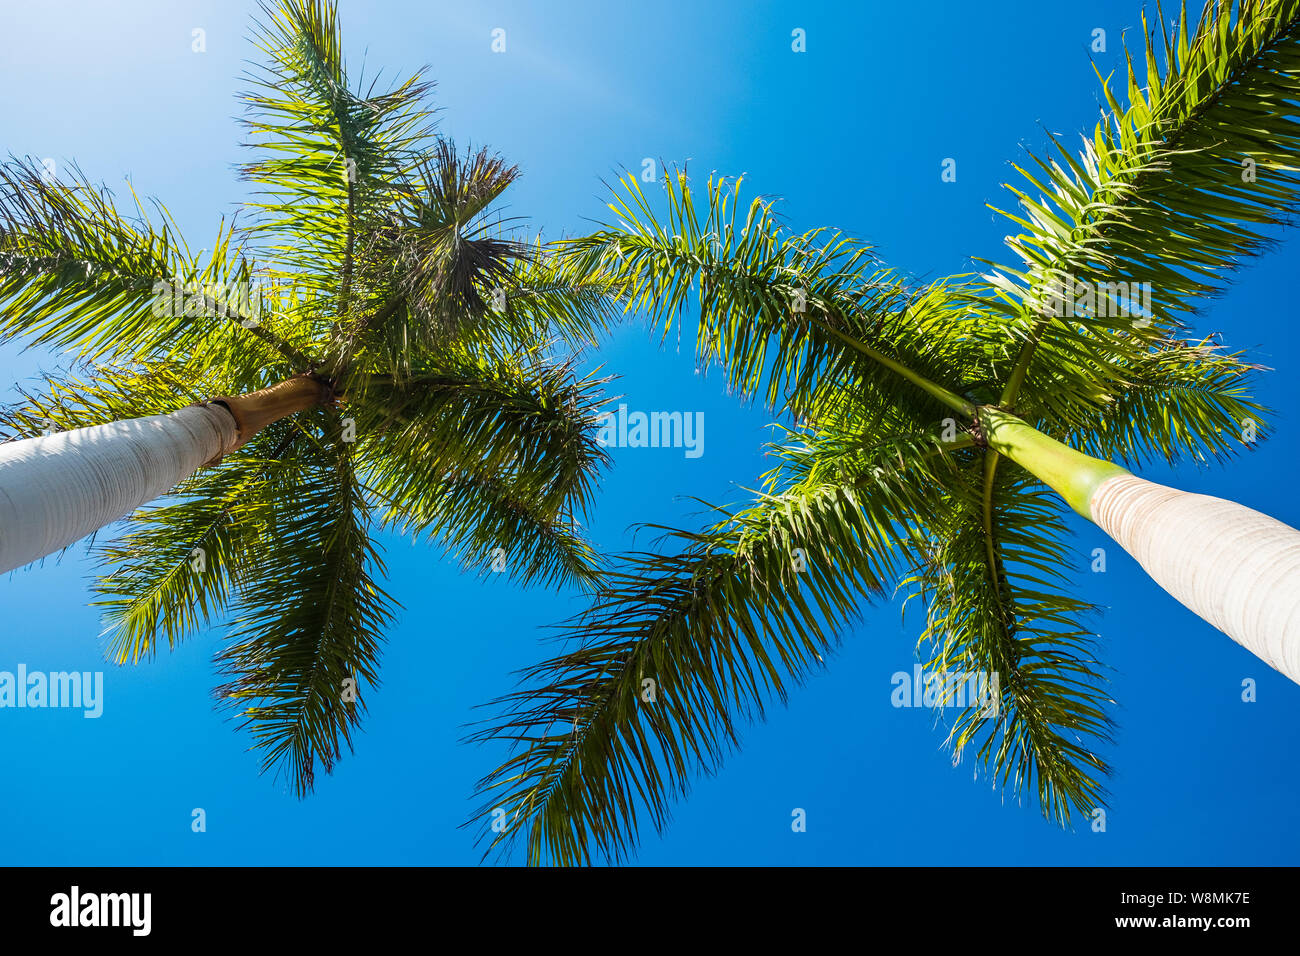 Ground view of palm trees in the blue sky clear background - tropical and summer holiday vacation concept with beautiful nature tree with green colors Stock Photo